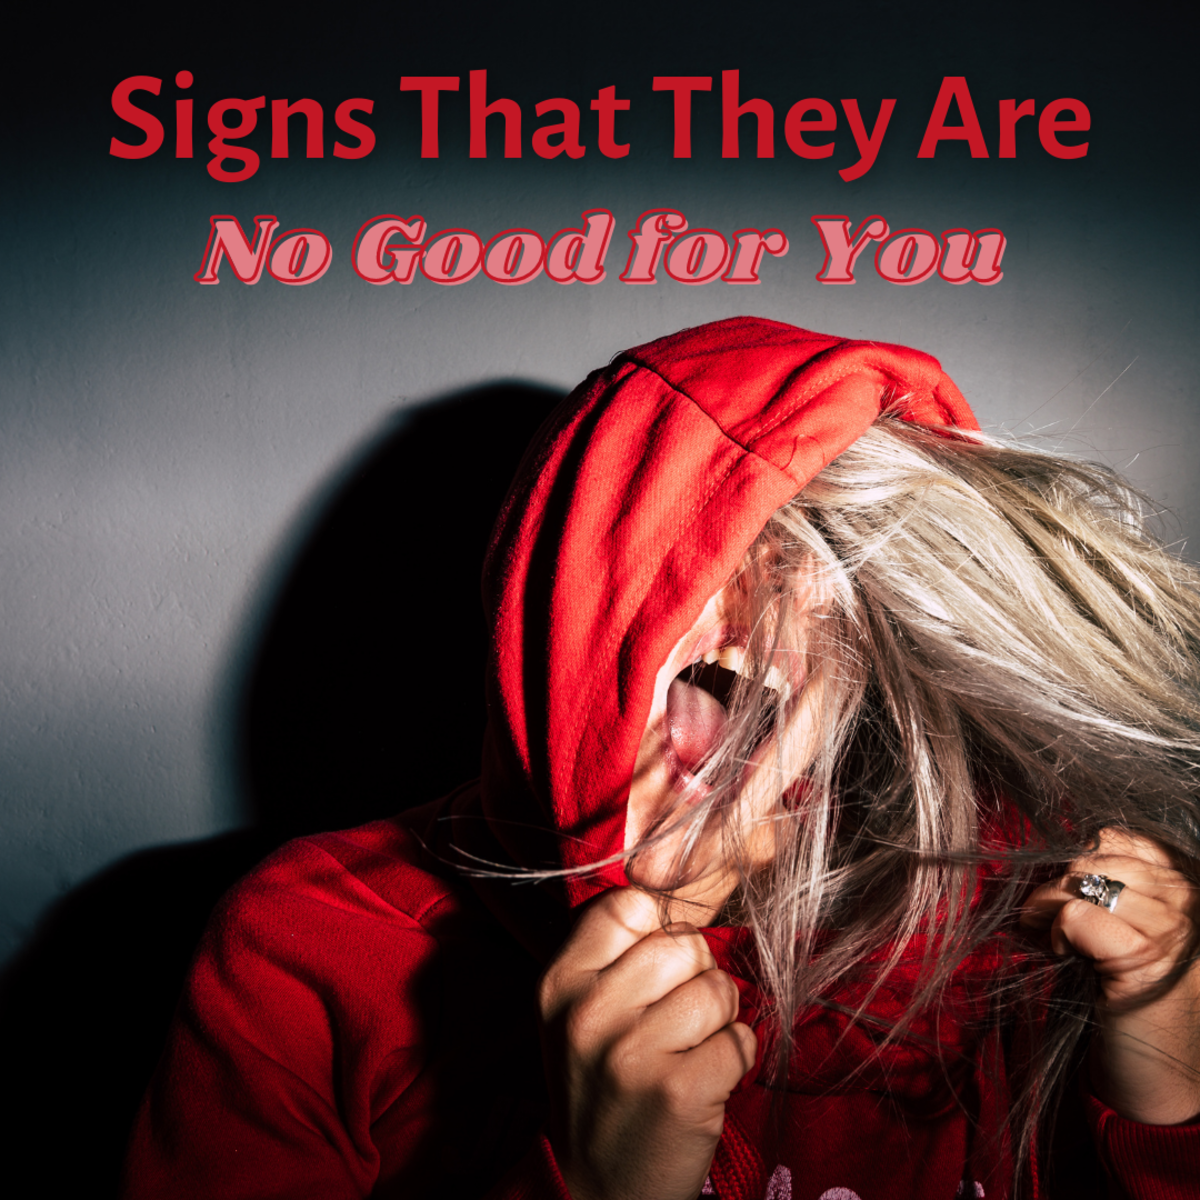 10 Signs That He or She Is No Good for You